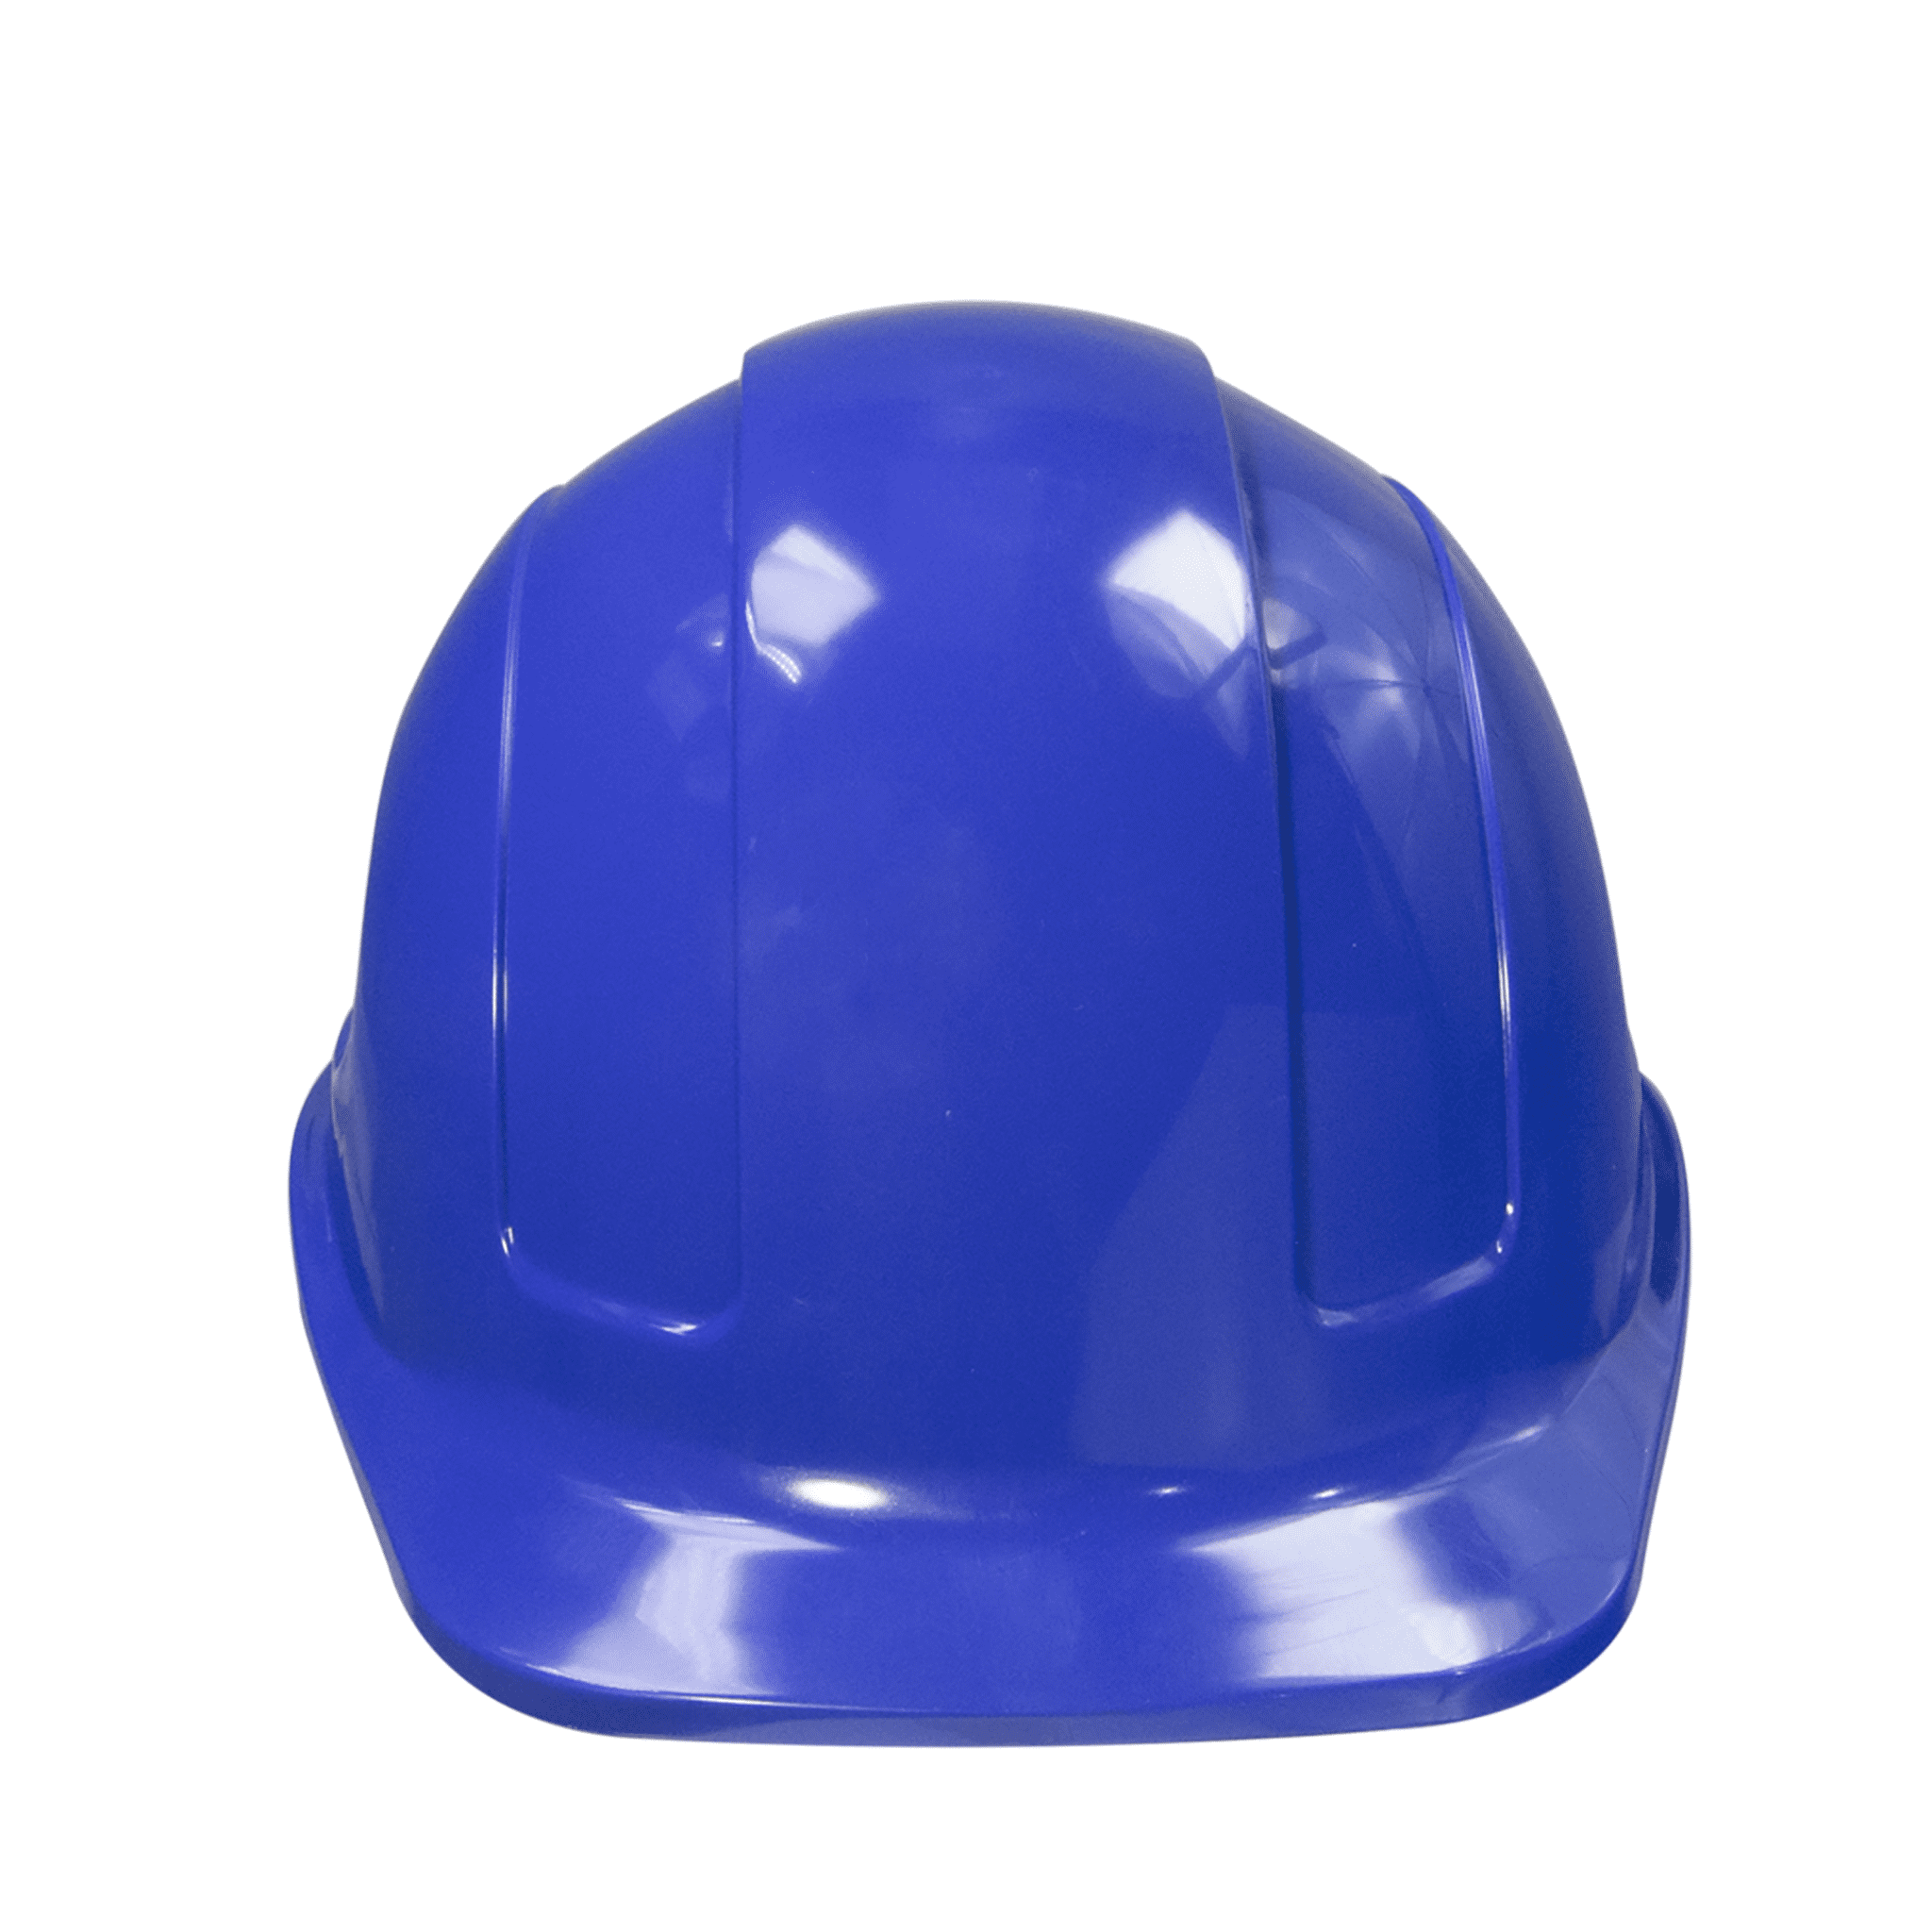 Suspension, 4-Point Hard Safety Front Hat with Brim JORESTECH (Green) and HHAT-01